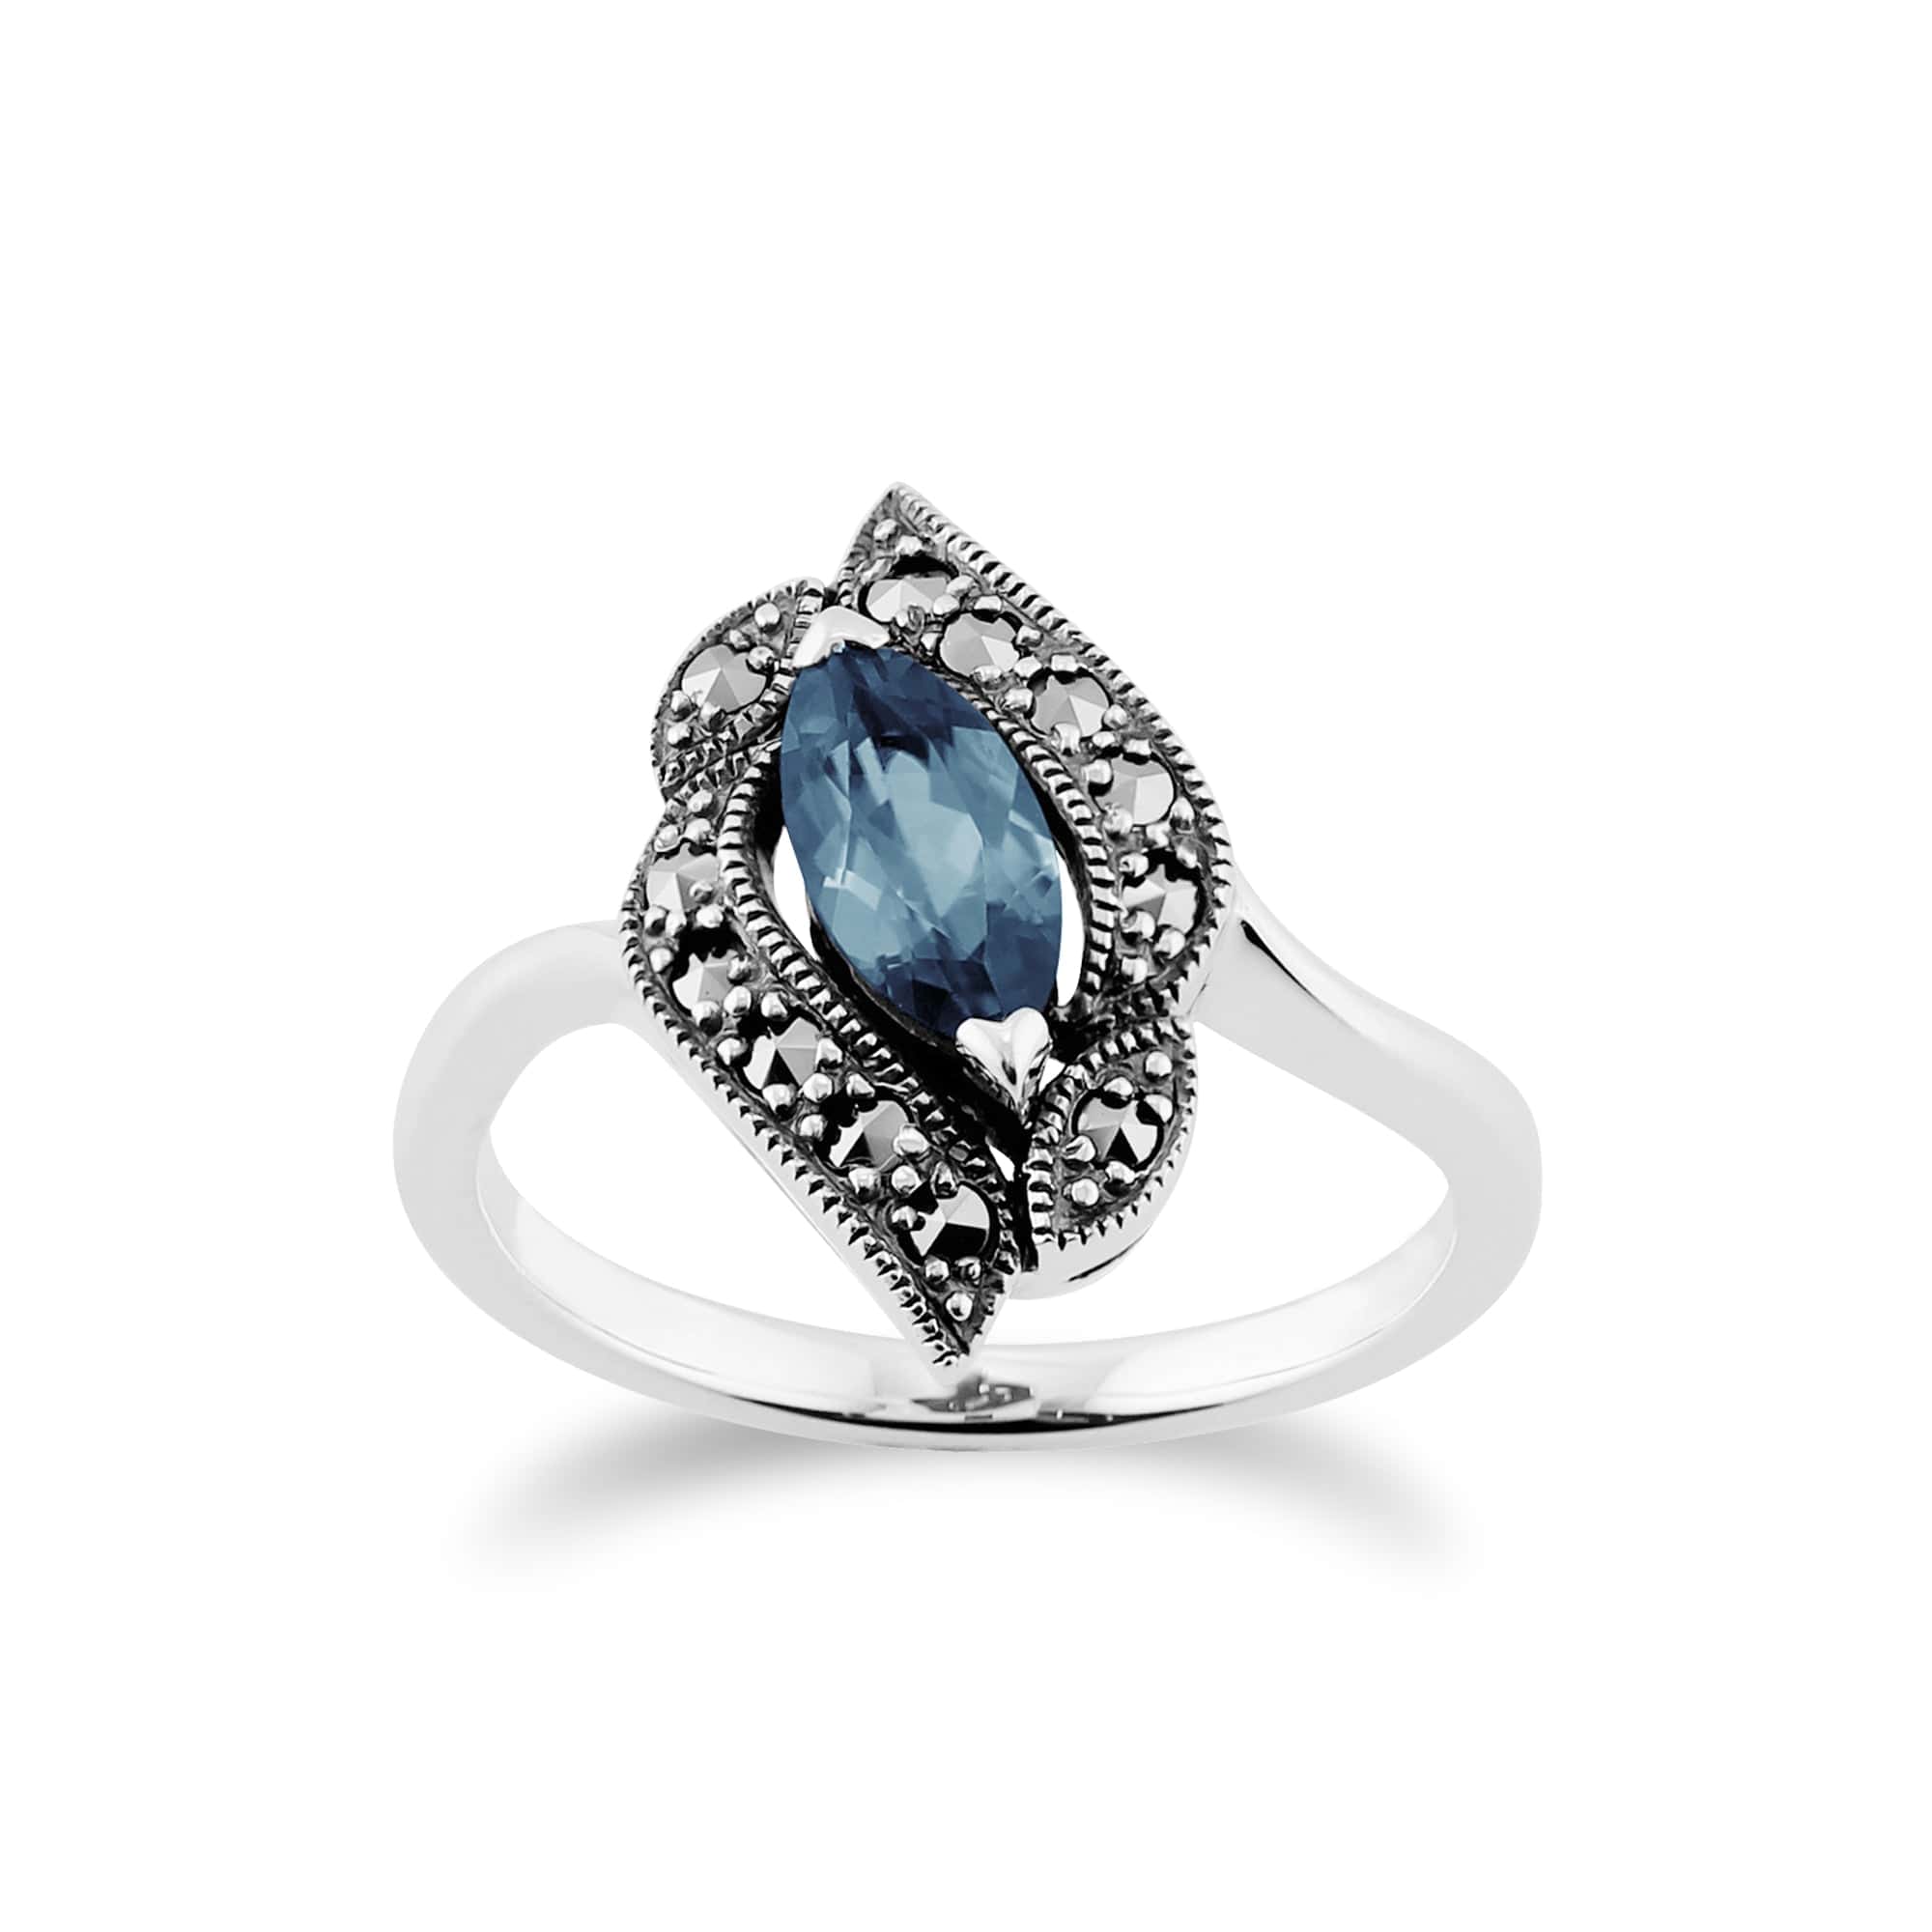 Art Nouveau Style Marquise Blue Topaz & Marcasite Ring in 925 Sterling Silver - Gemondo